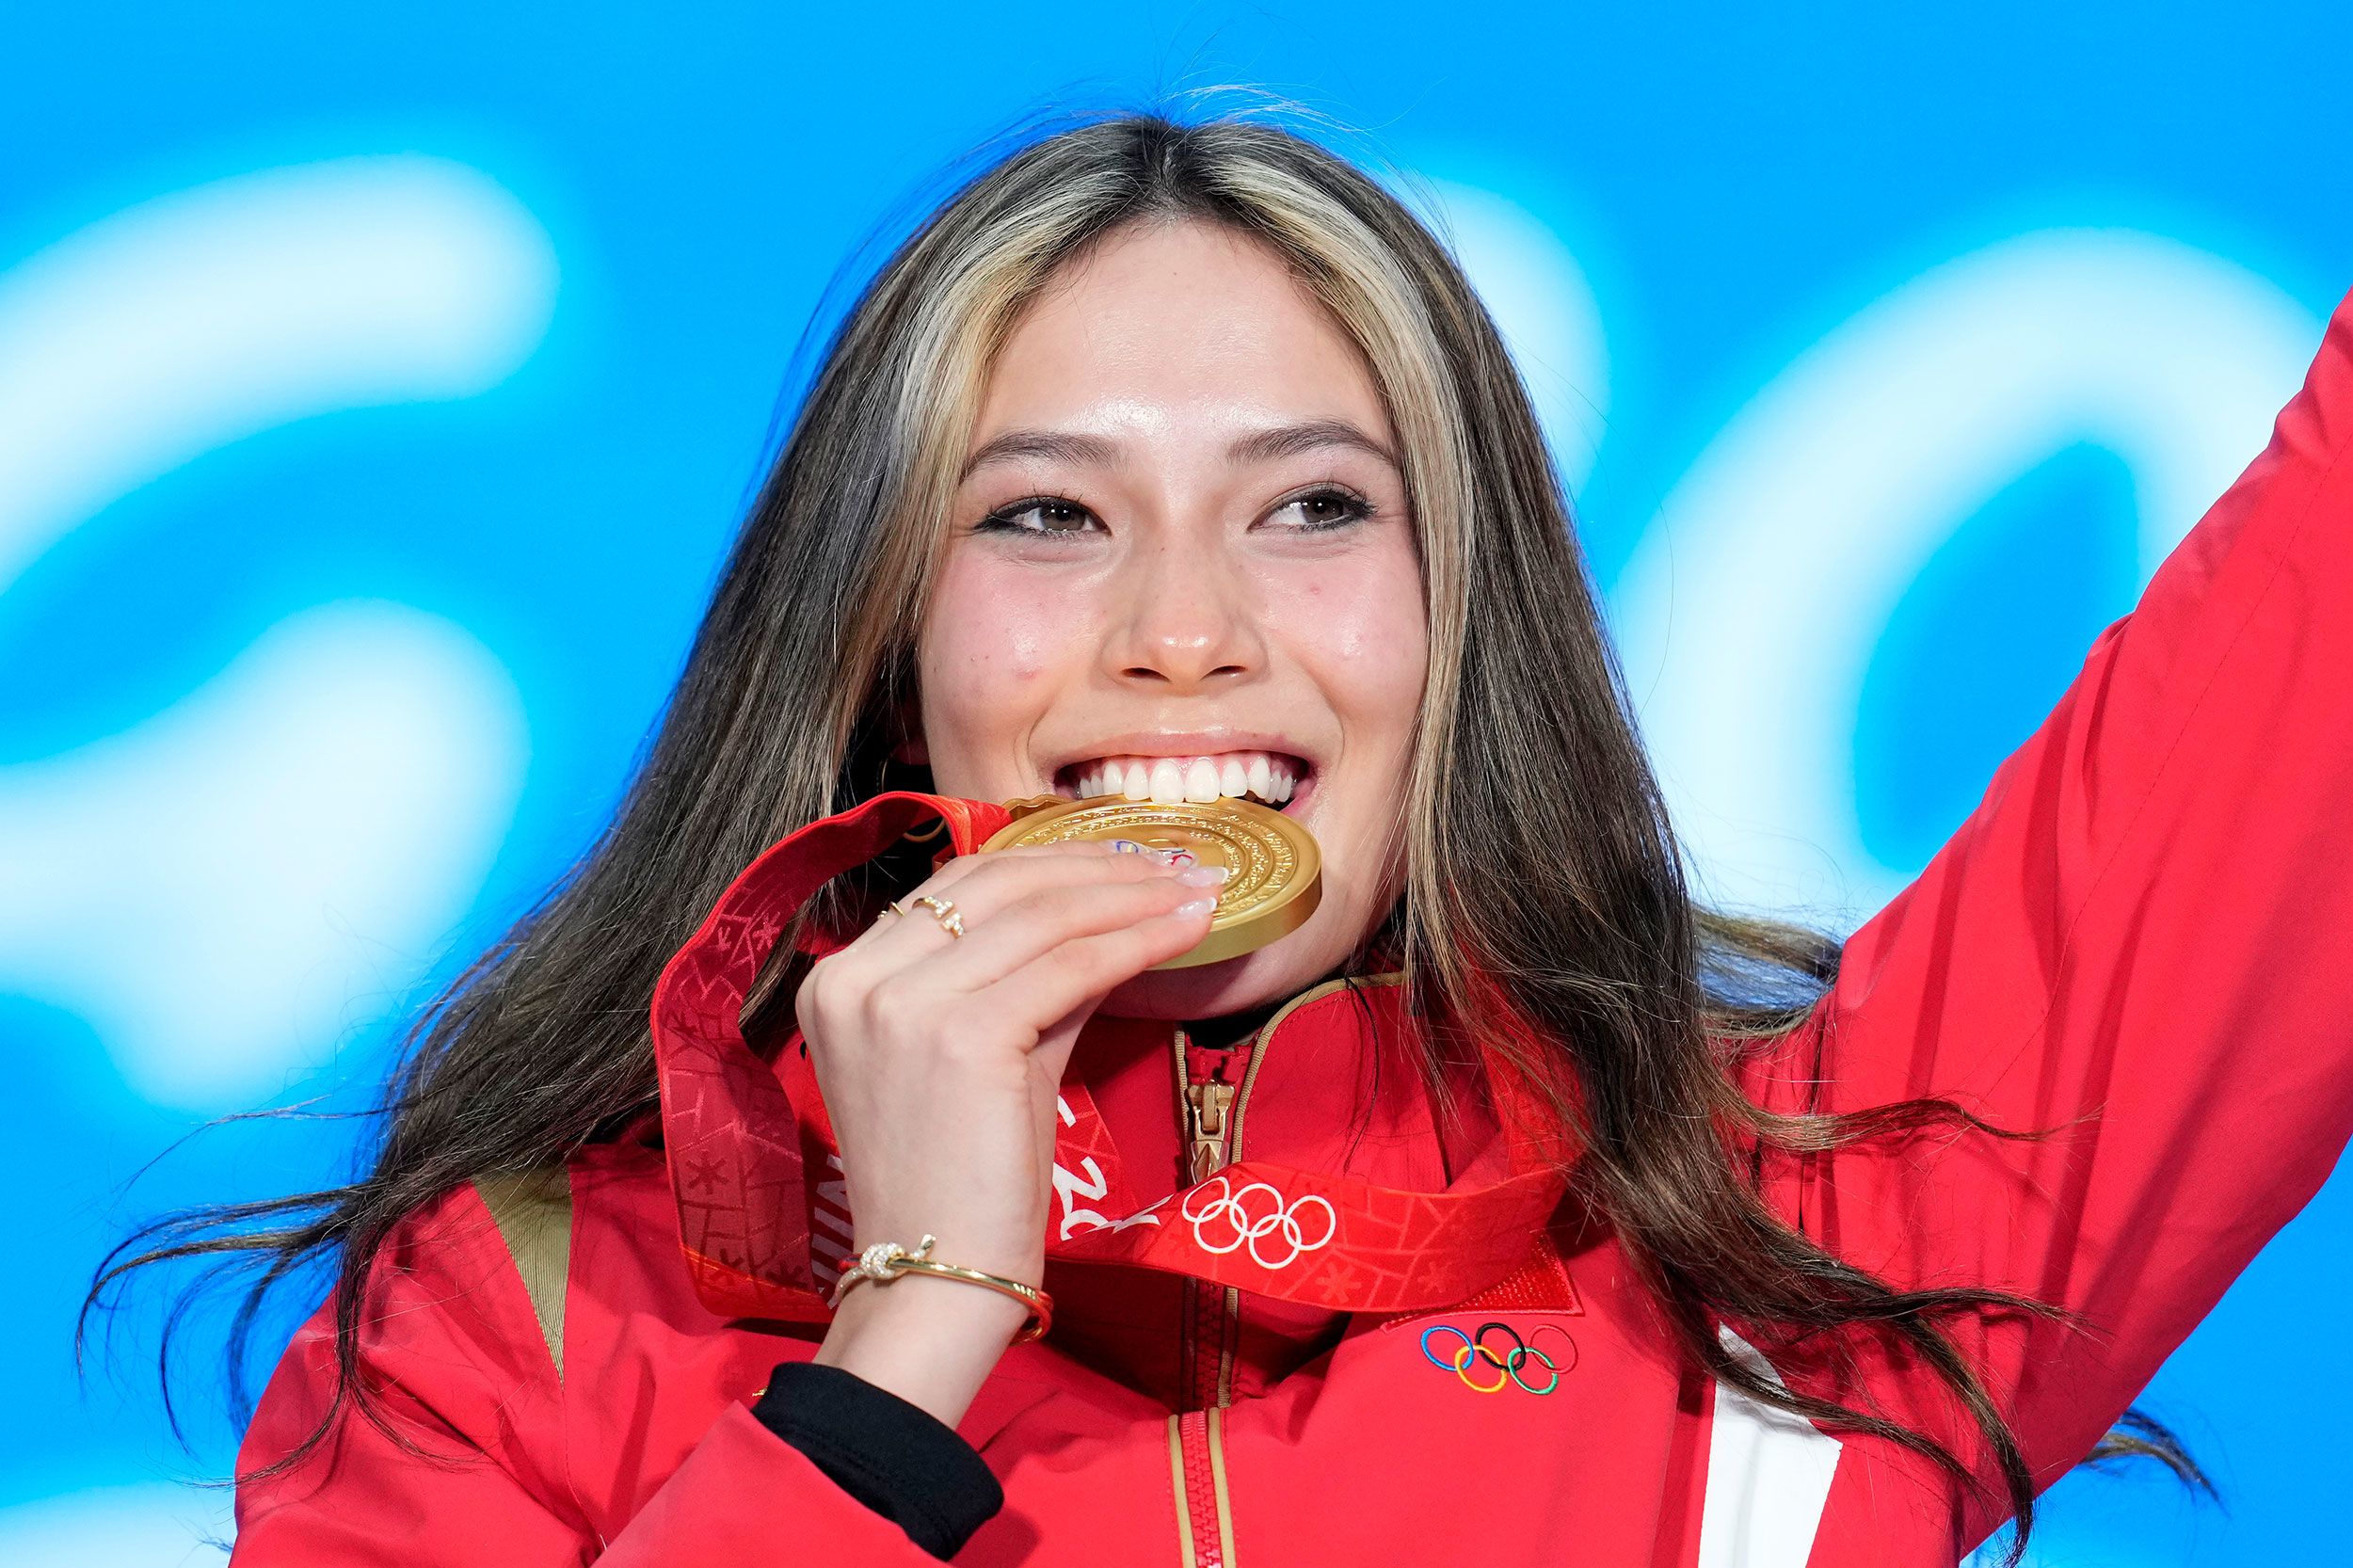 Opinion: Controversy over gold medalist Eileen Gu skiing for China misses  the point